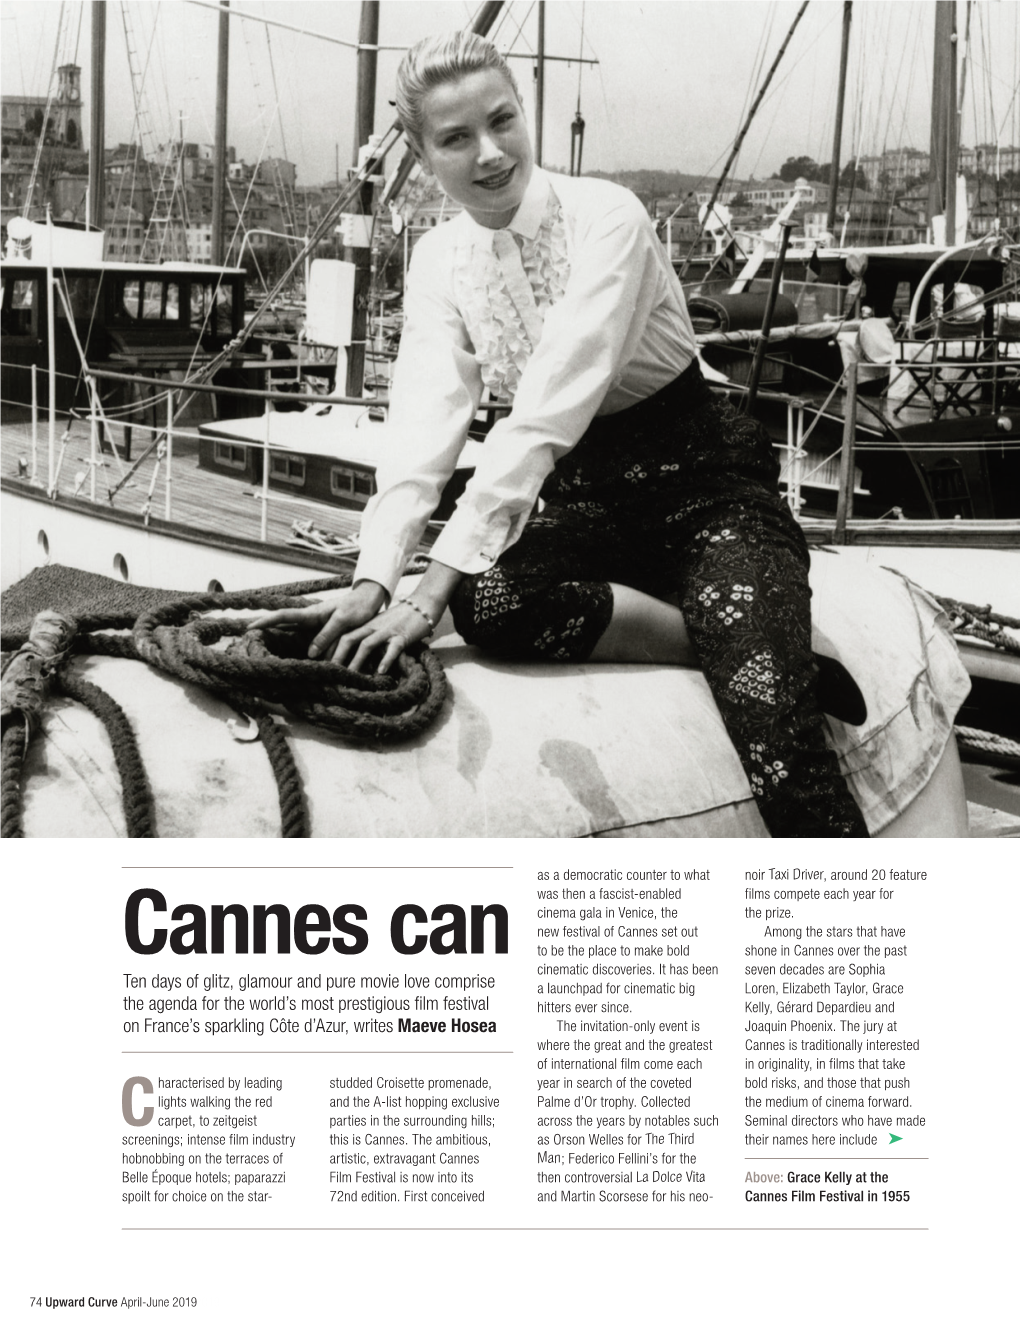 Cannes Set out Among the Stars That Have to Be the Place to Make Bold Shone in Cannes Over the Past Cannes Can Cinematic Discoveries